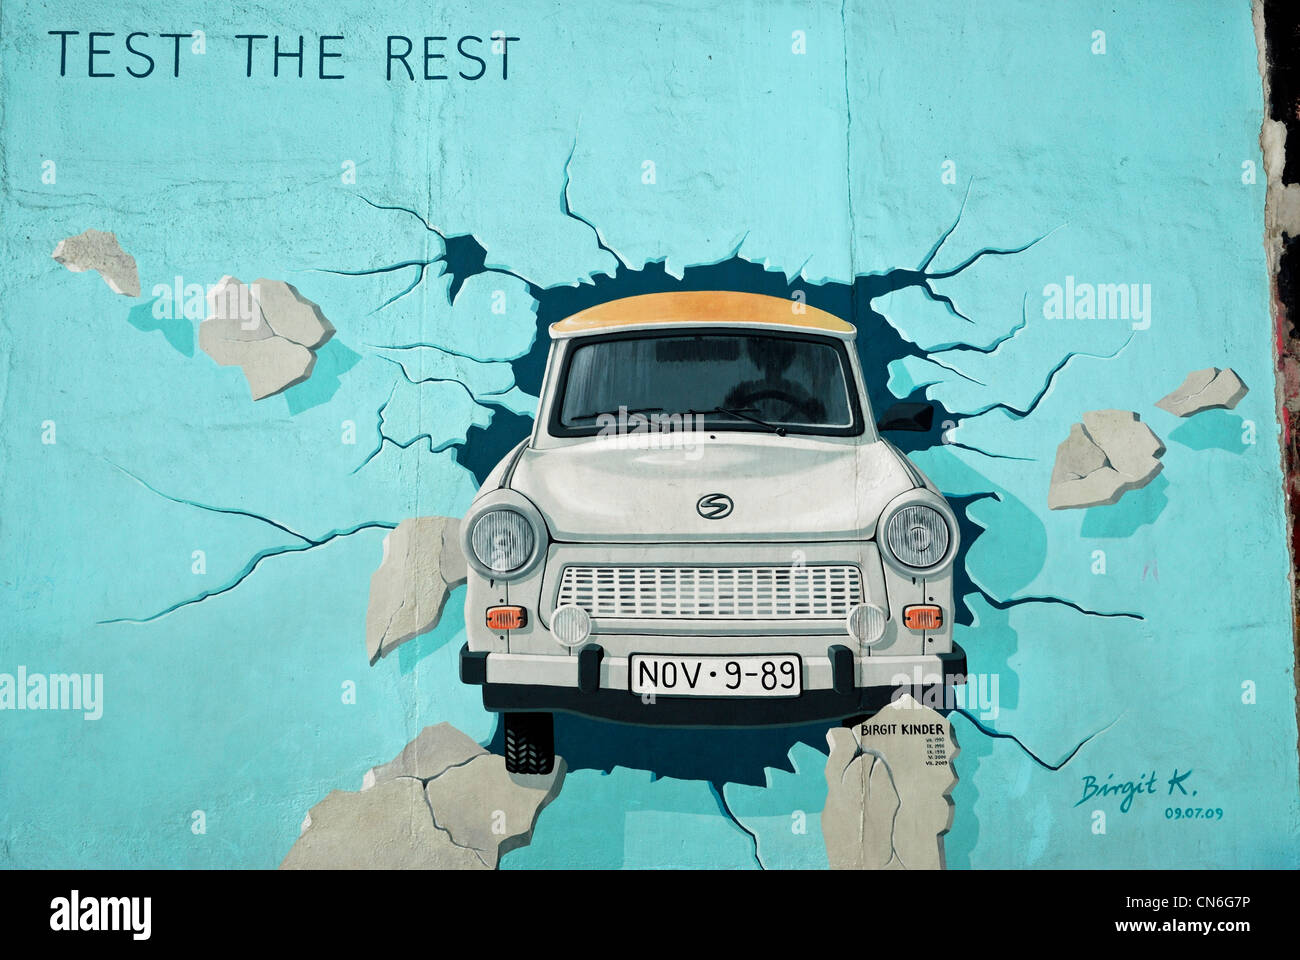 Birgit Kinder's 'Test the Rest' on the Berlin Wall at the East Side Gallery, Berlin, Germany. Stock Photo